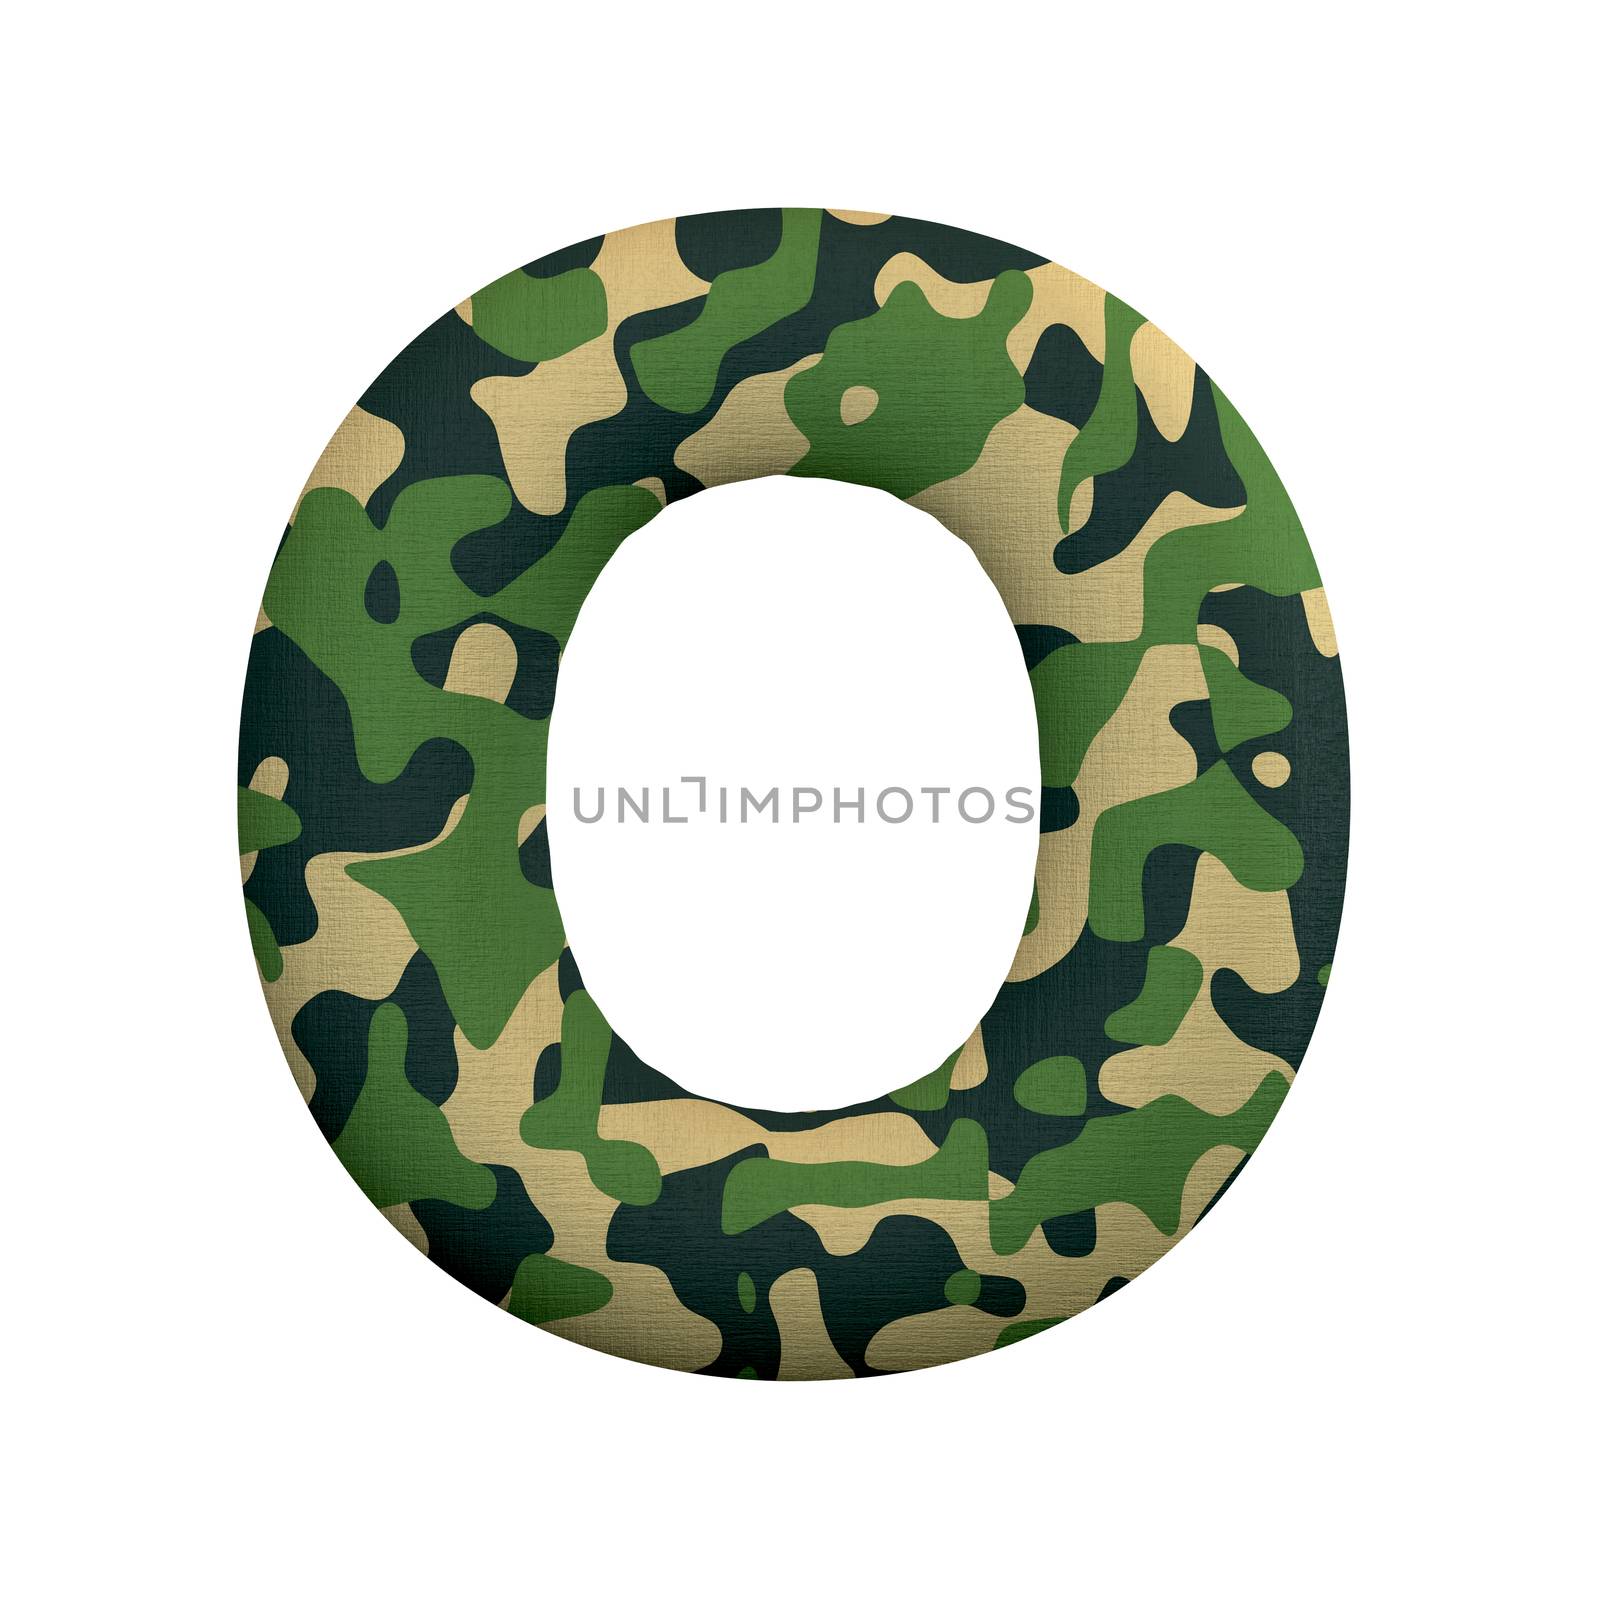 Army letter O - Capital 3d Camo font isolated on white background. This alphabet is perfect for creative illustrations related but not limited to Army, war, survivalism...